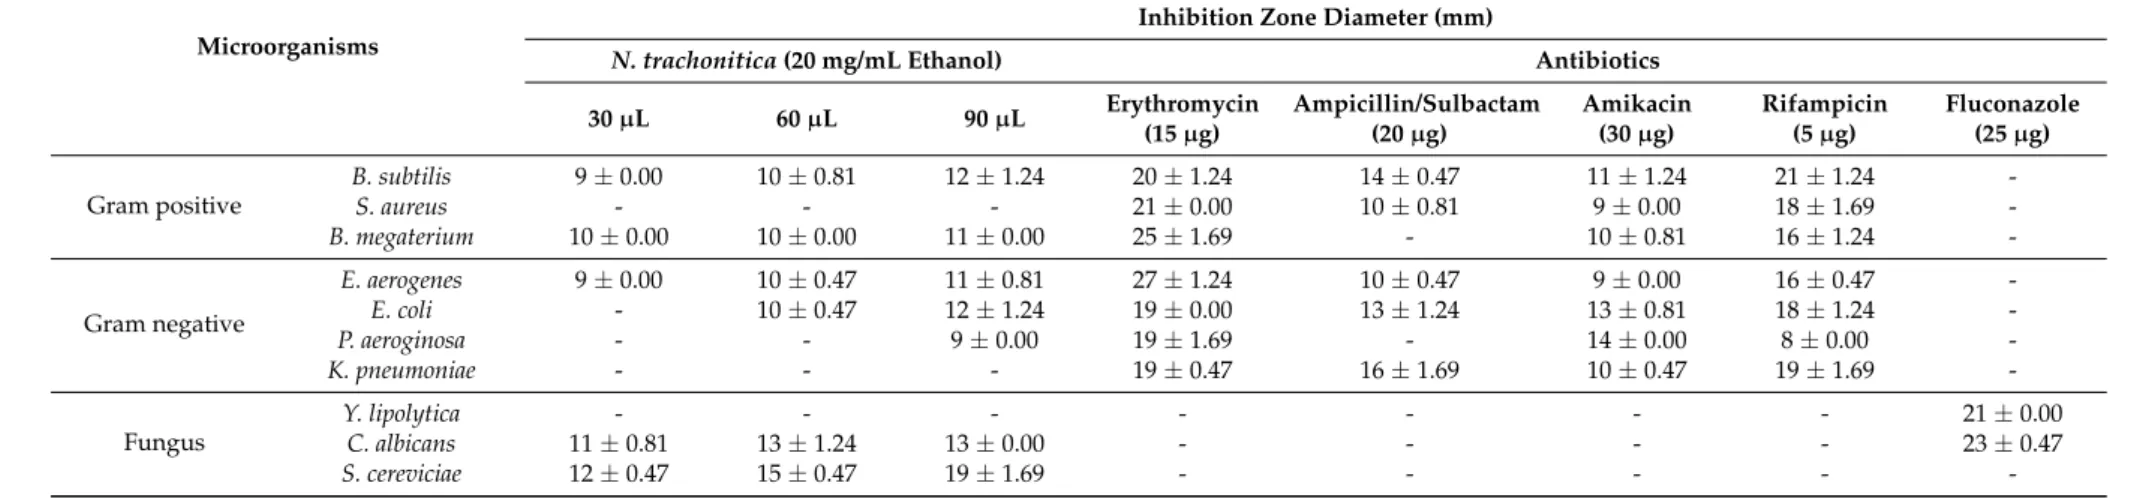 Table 2. Antimicrobial and antifungal activity results of N. trachonitica.